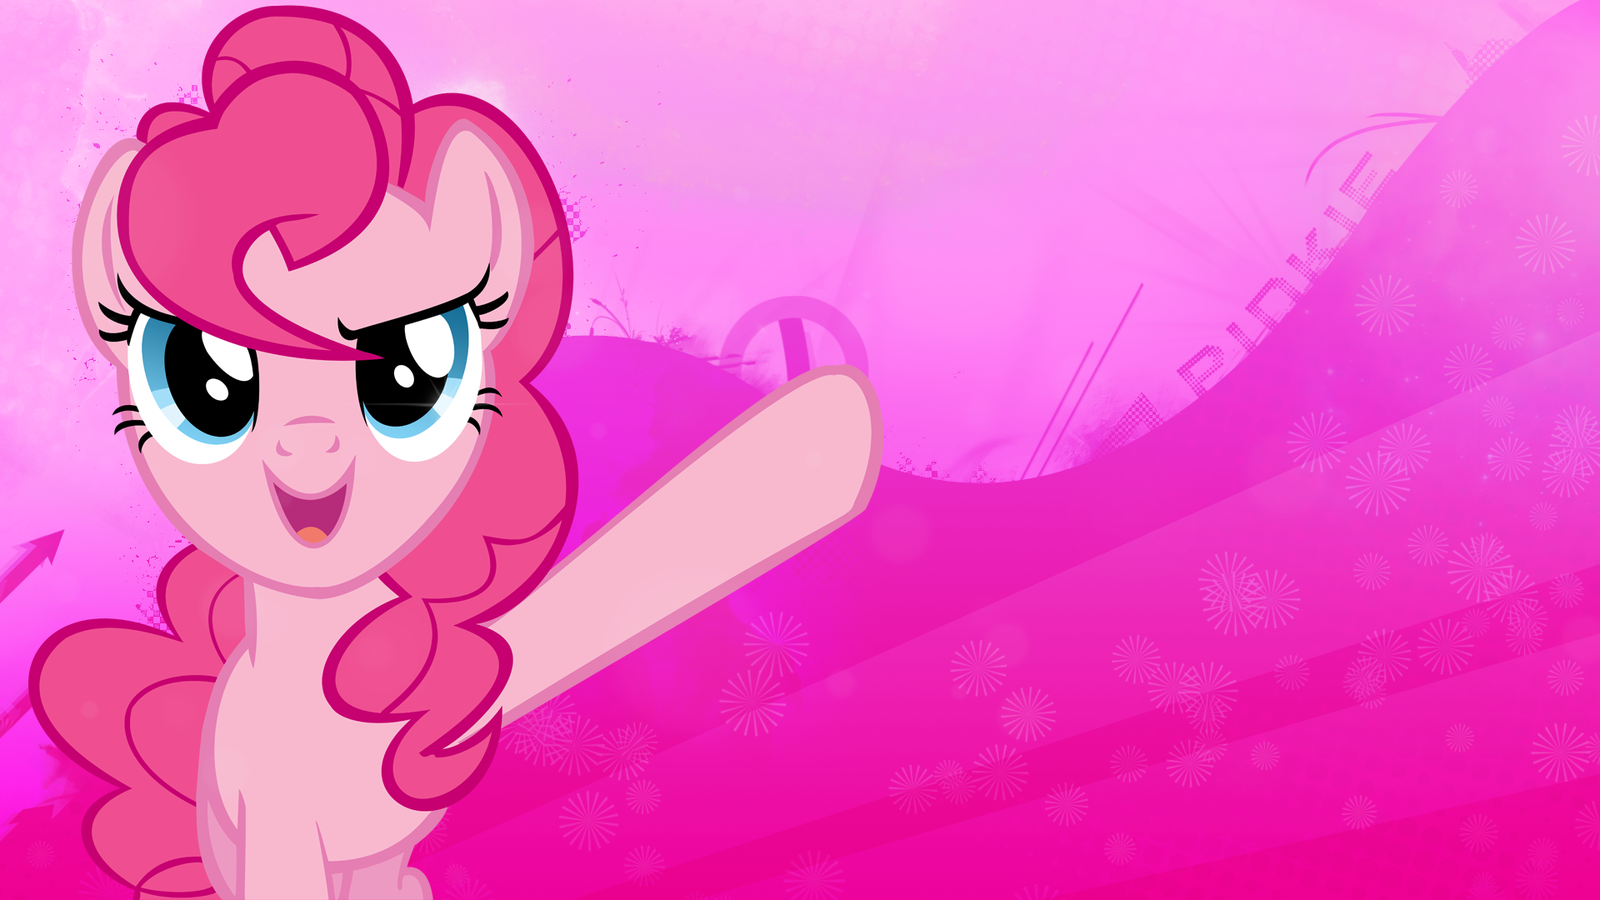 pinkie_pie_salutes_you___wallpaper_by_3i